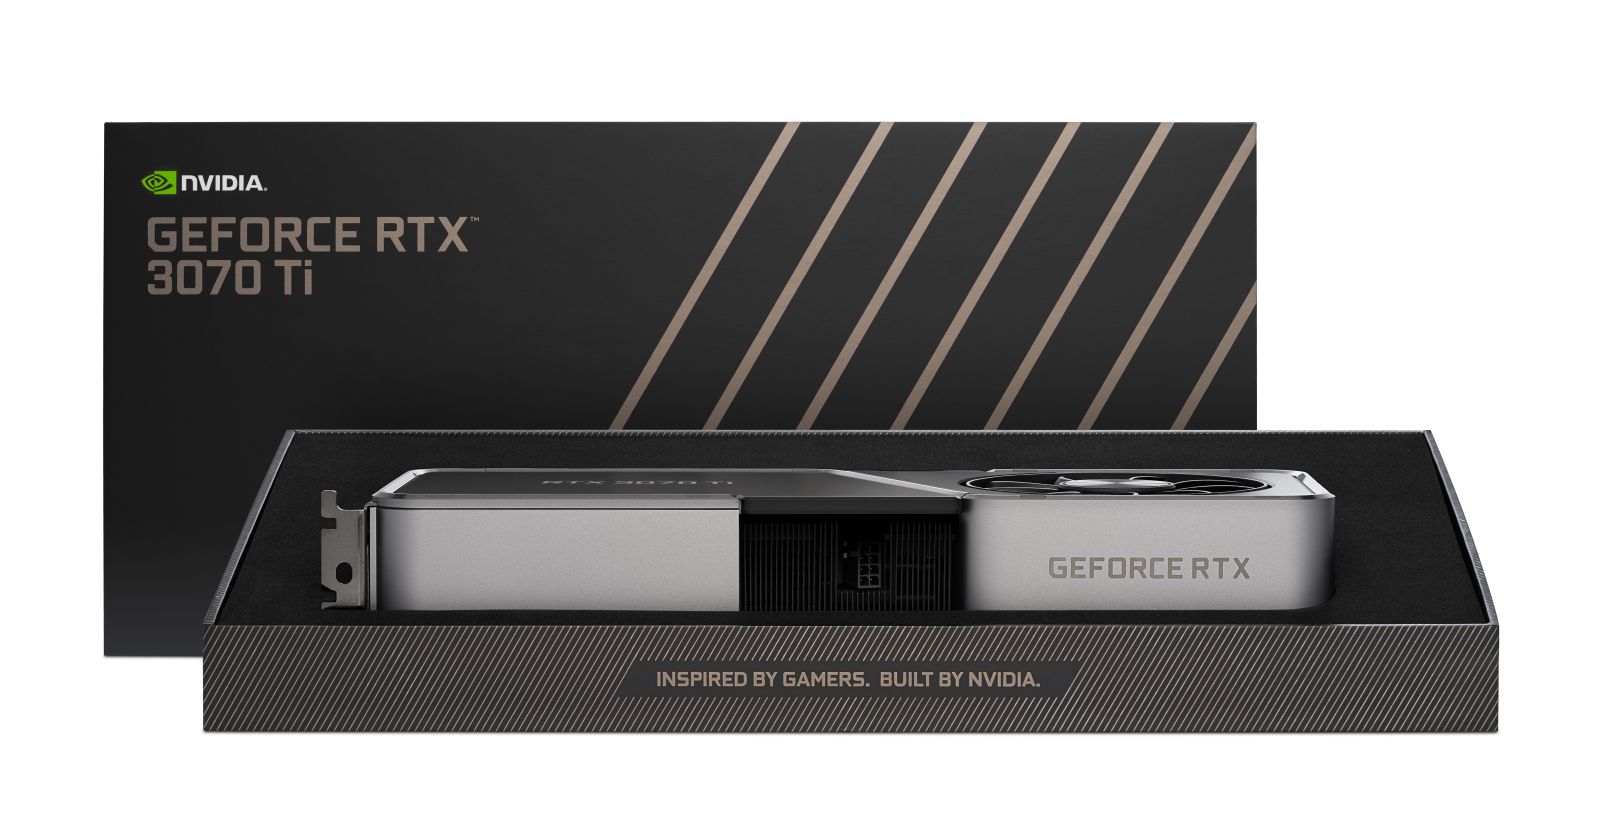 Nvidia GeForce RTX 3070 Ti Reviews, Pros and Cons